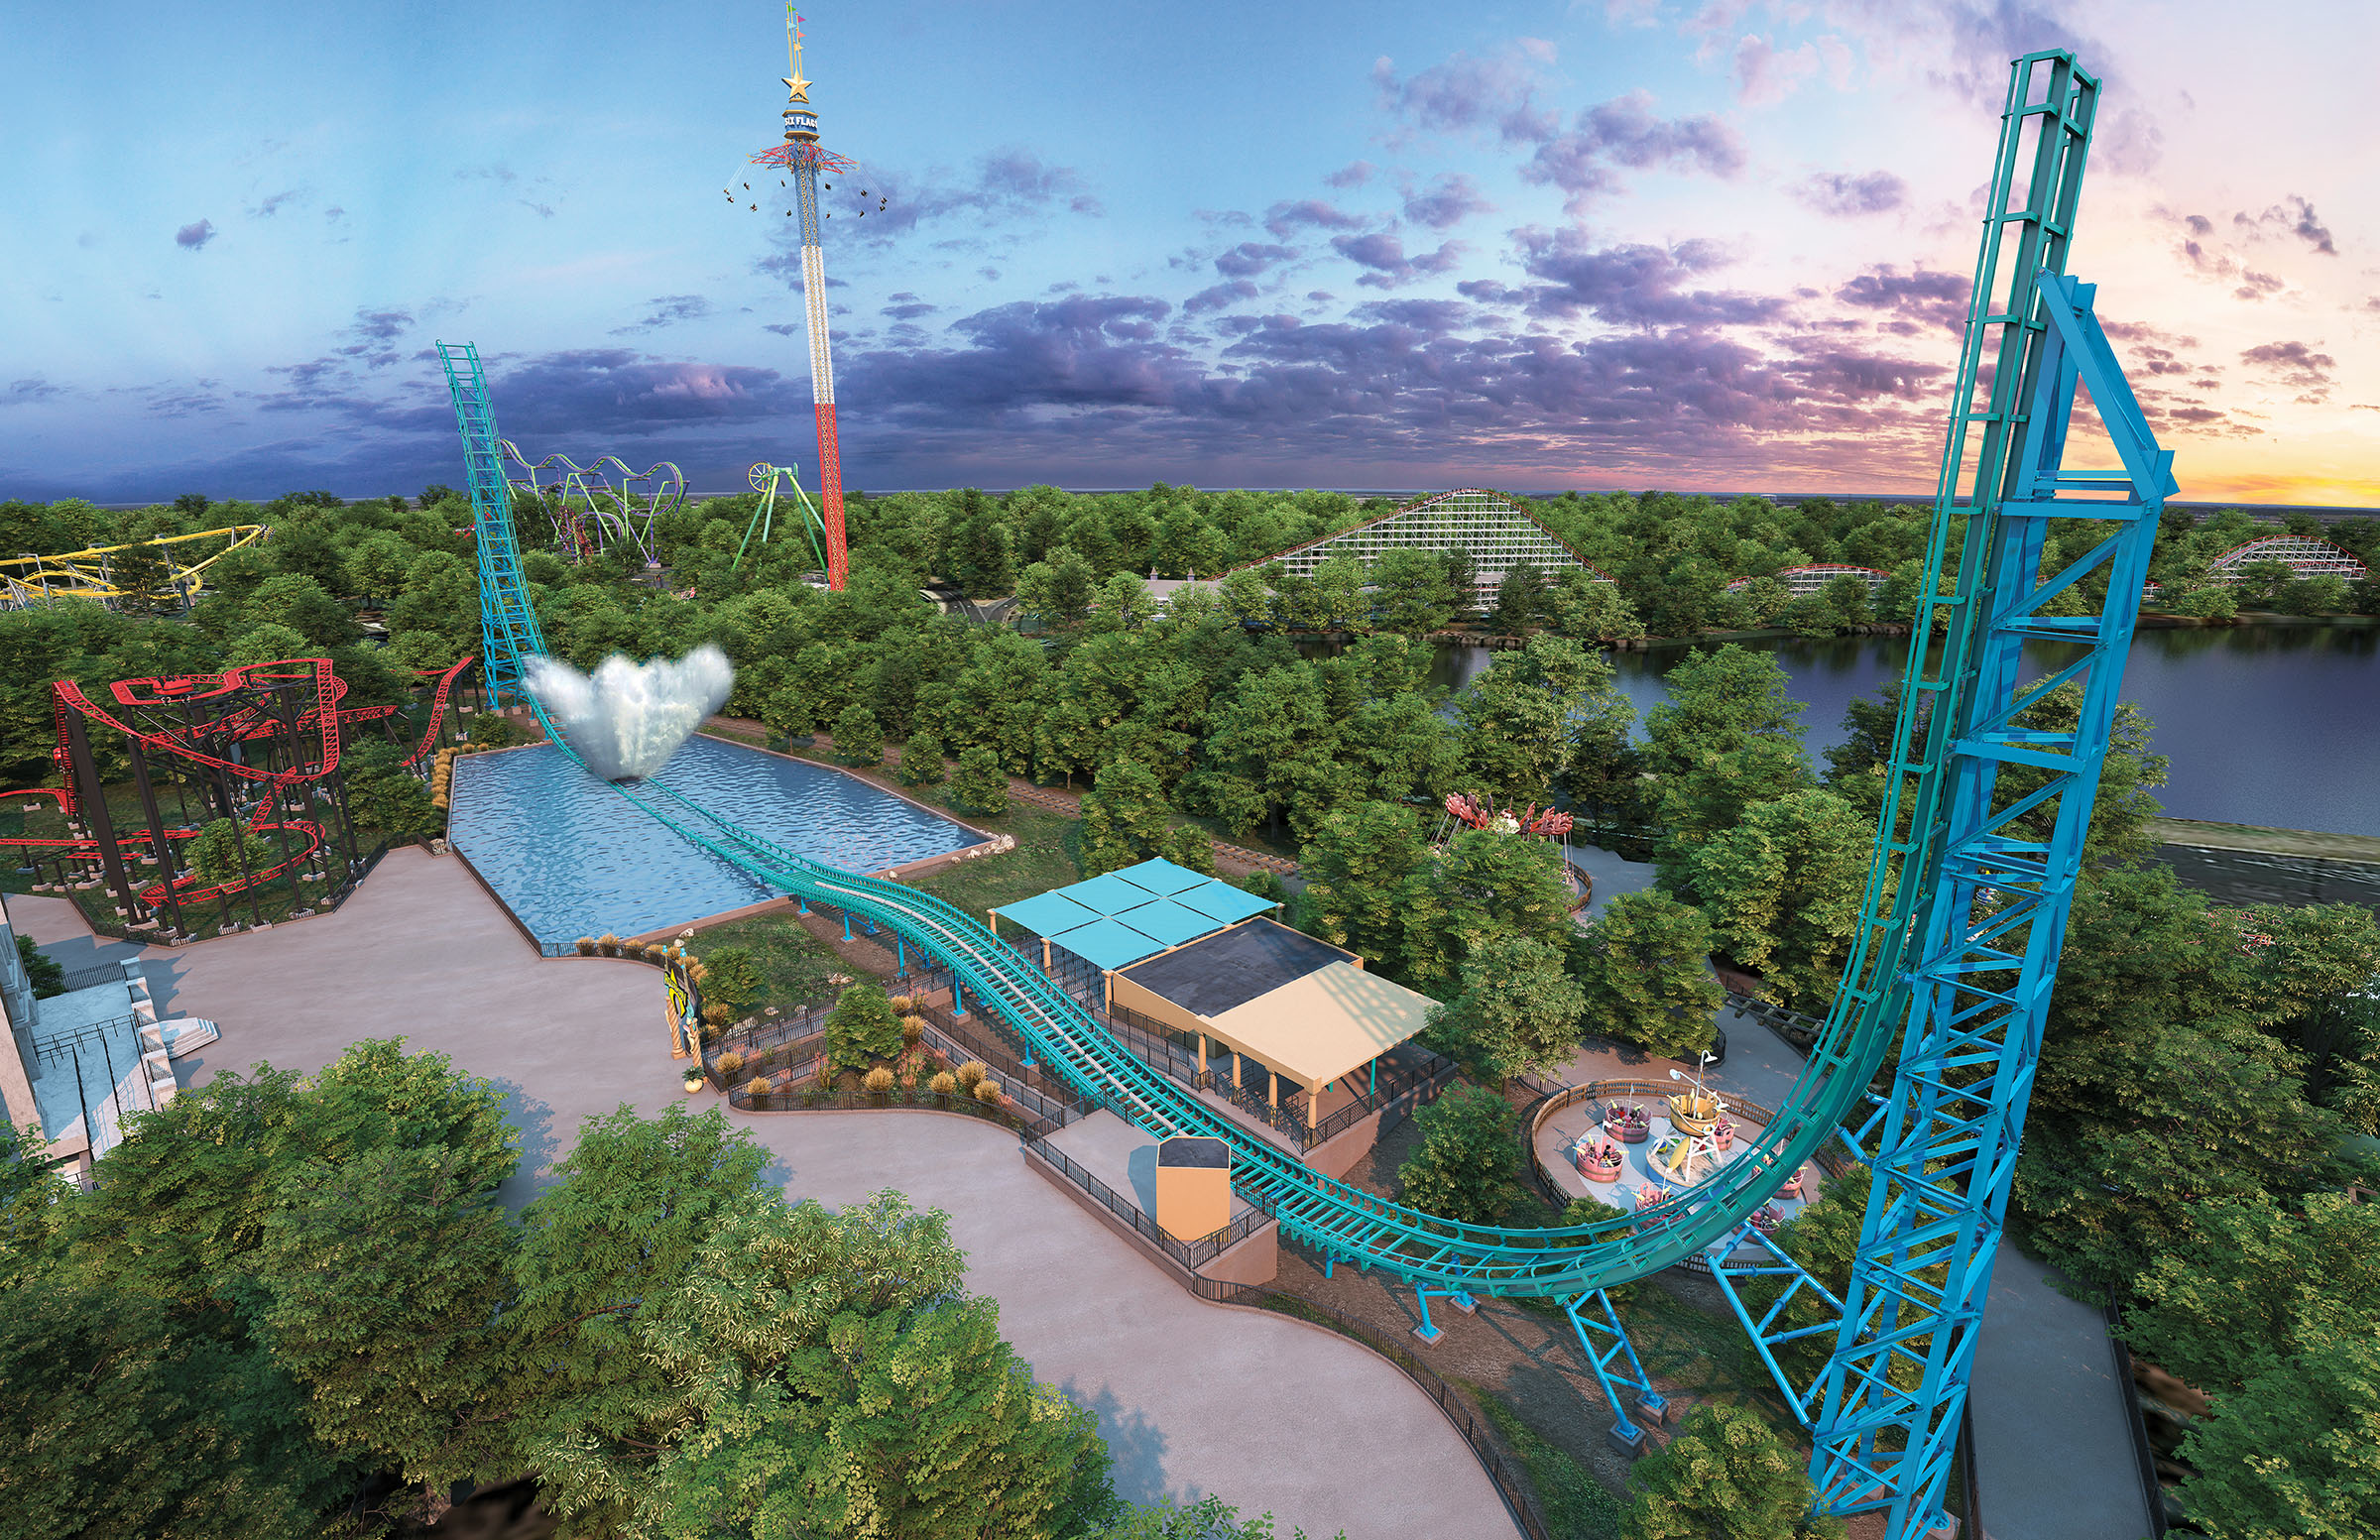 A photo of a very tall, bright blue roller coaster above green trees